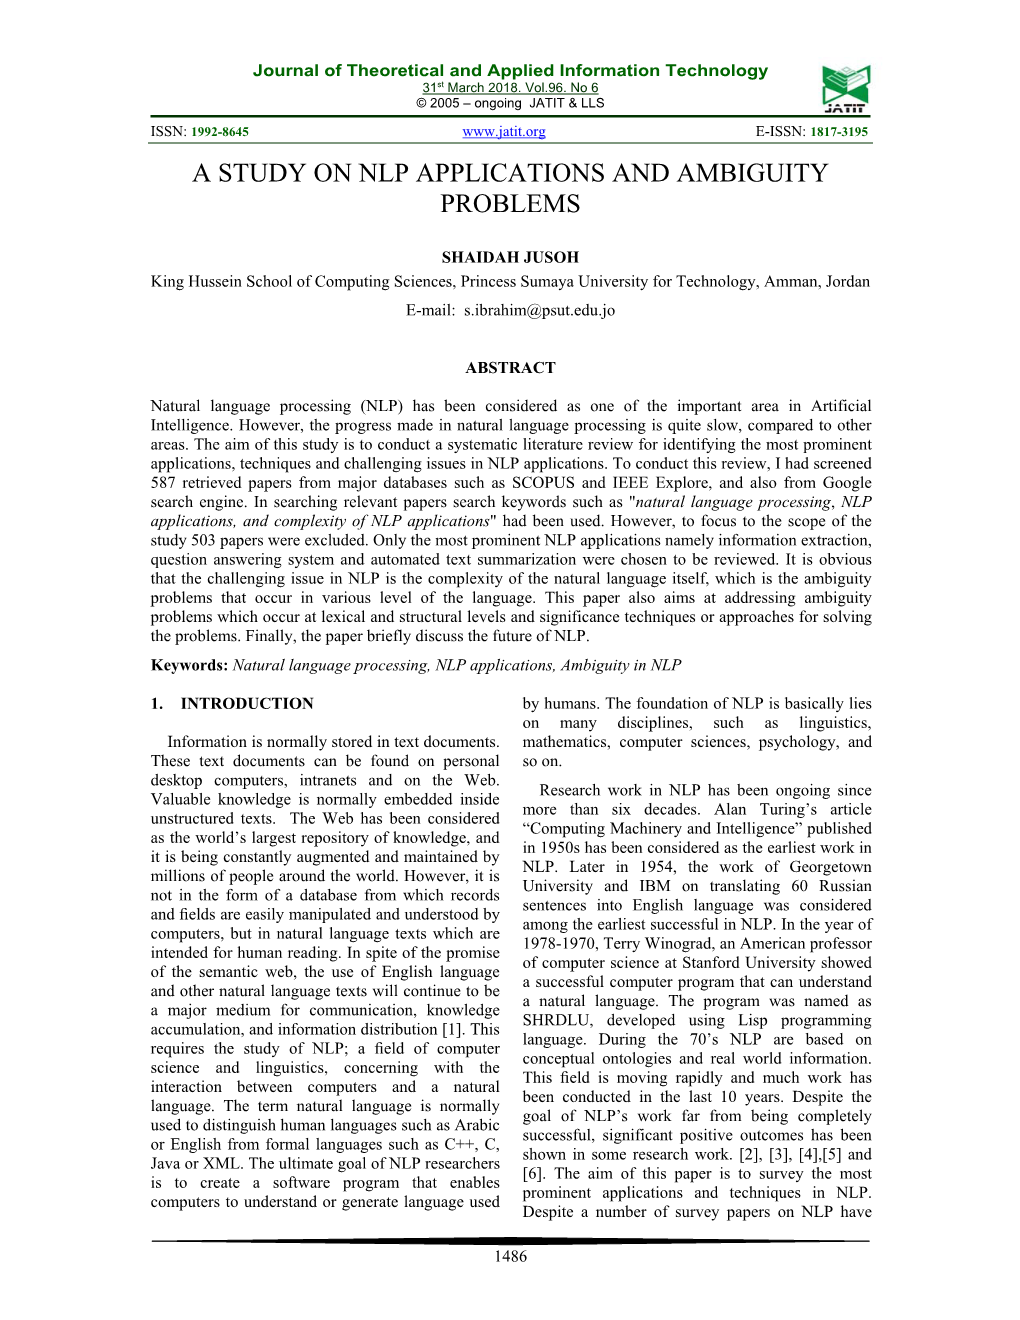 A Study on Nlp Applications and Ambiguity Problems